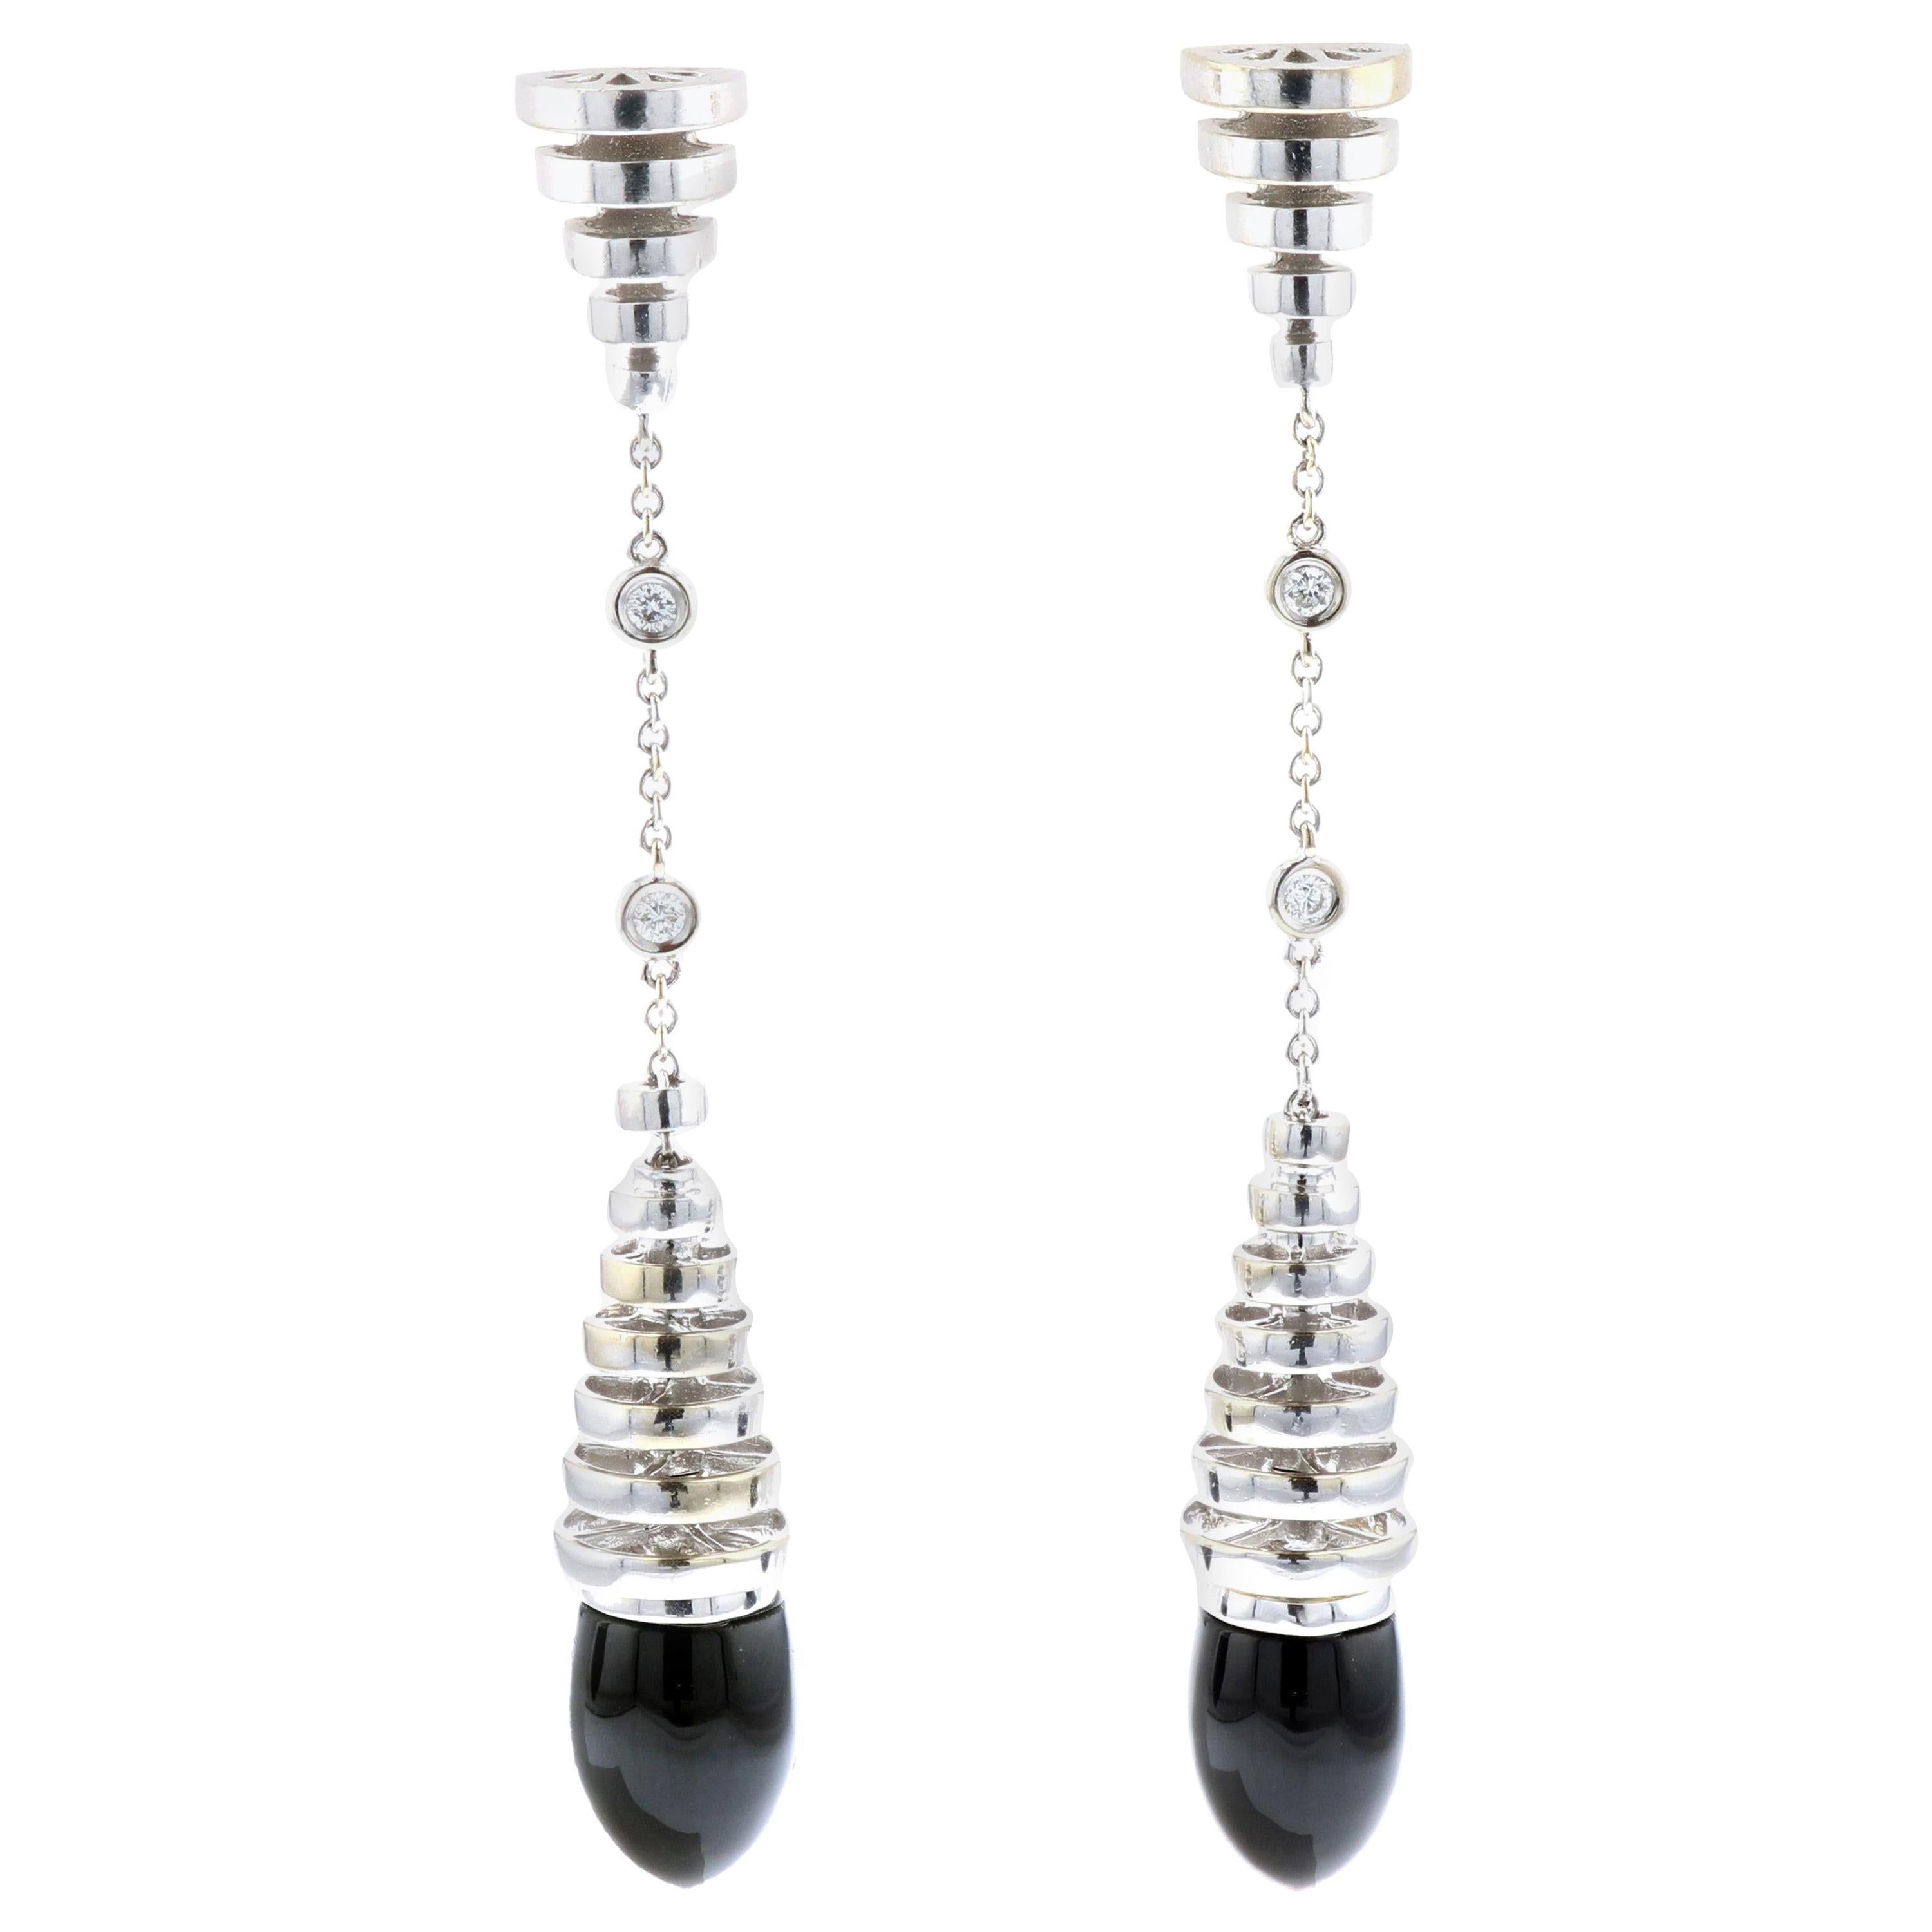 Cartier Interchangeable Onyx and Rose Quartz Drop Earrings in 18K White Gold